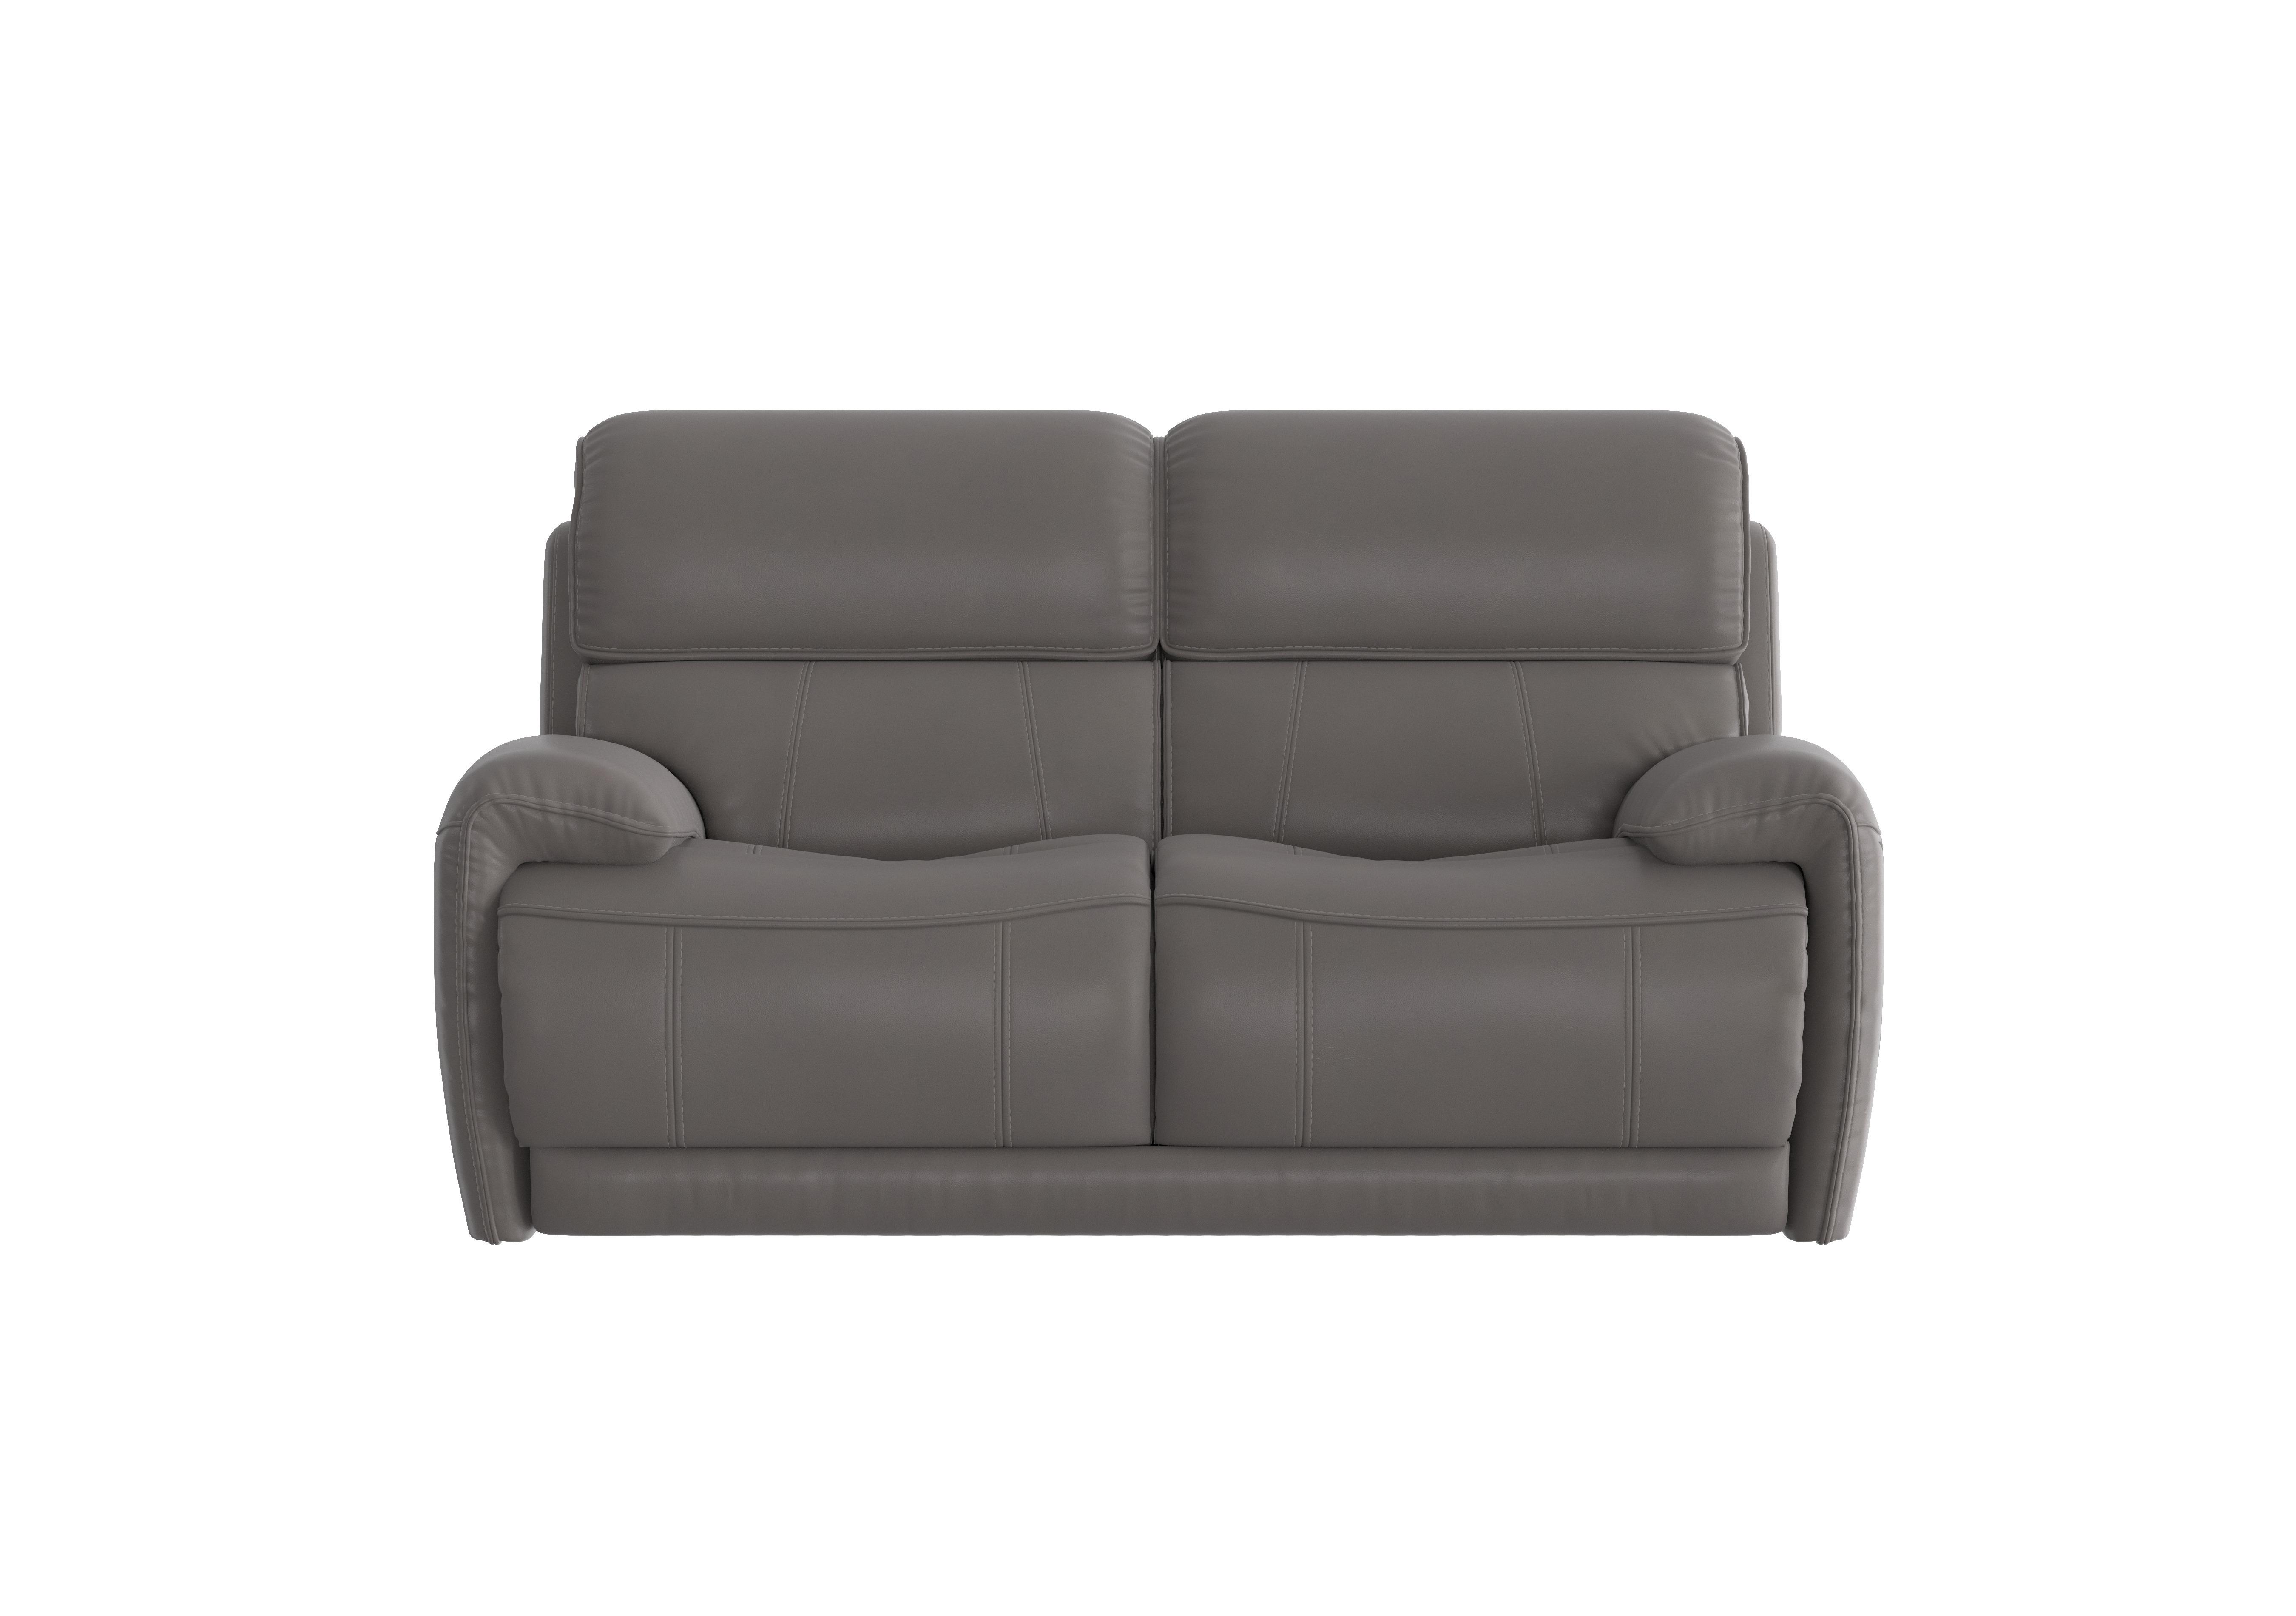 Link 2 Seater Leather Sofa in Bv-042e Elephant on Furniture Village